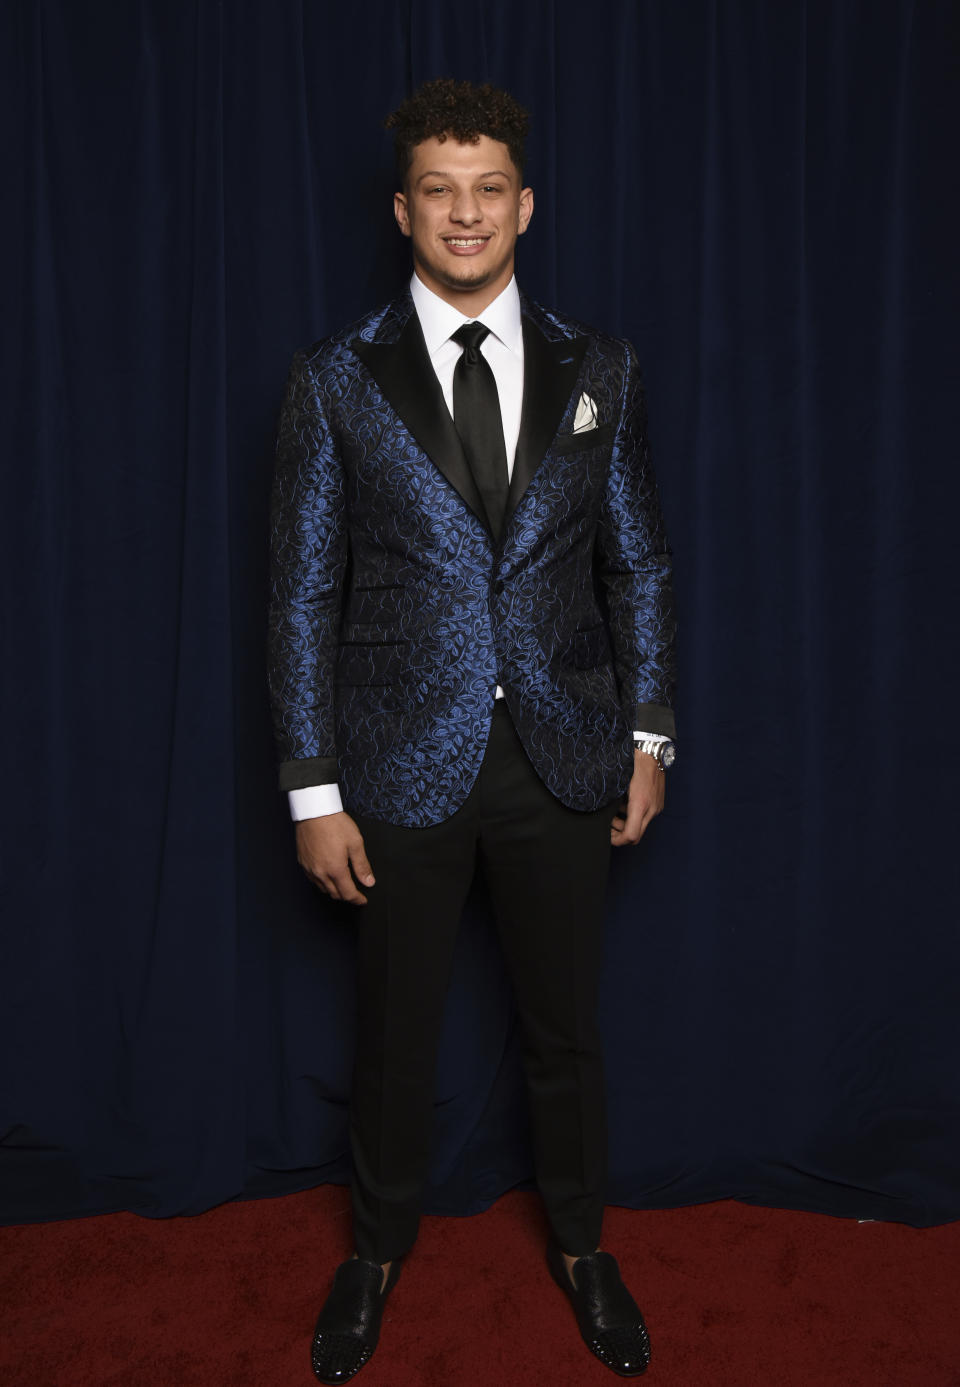 Patrick Mahomes II of the Kansas City Chiefs poses backstage at the 8th Annual NFL Honors at The Fox Theatre on Saturday, Feb. 2, 2019, in Atlanta. (Photo by Peter Barreras/Invision for NFL/AP Images)